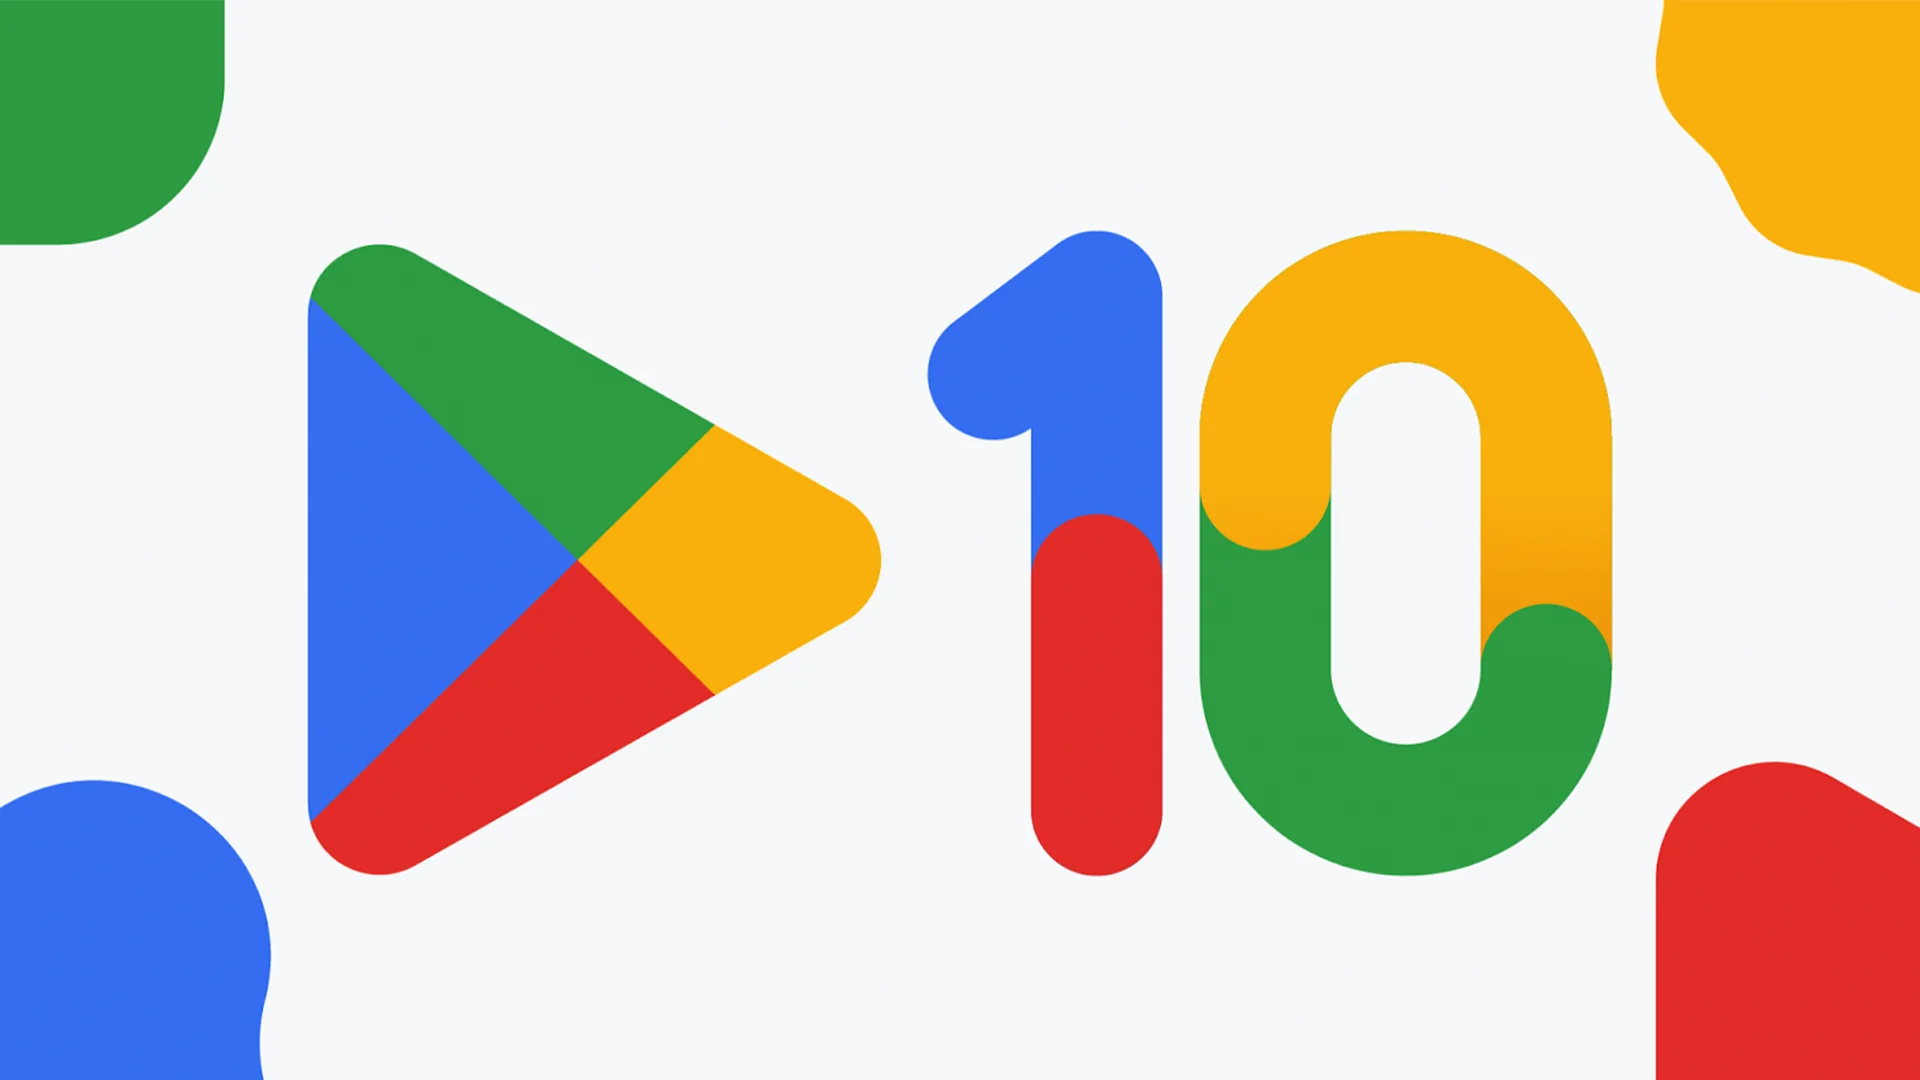 Google Play is celebrating its anniversary. On this occasion, the service logo was updated